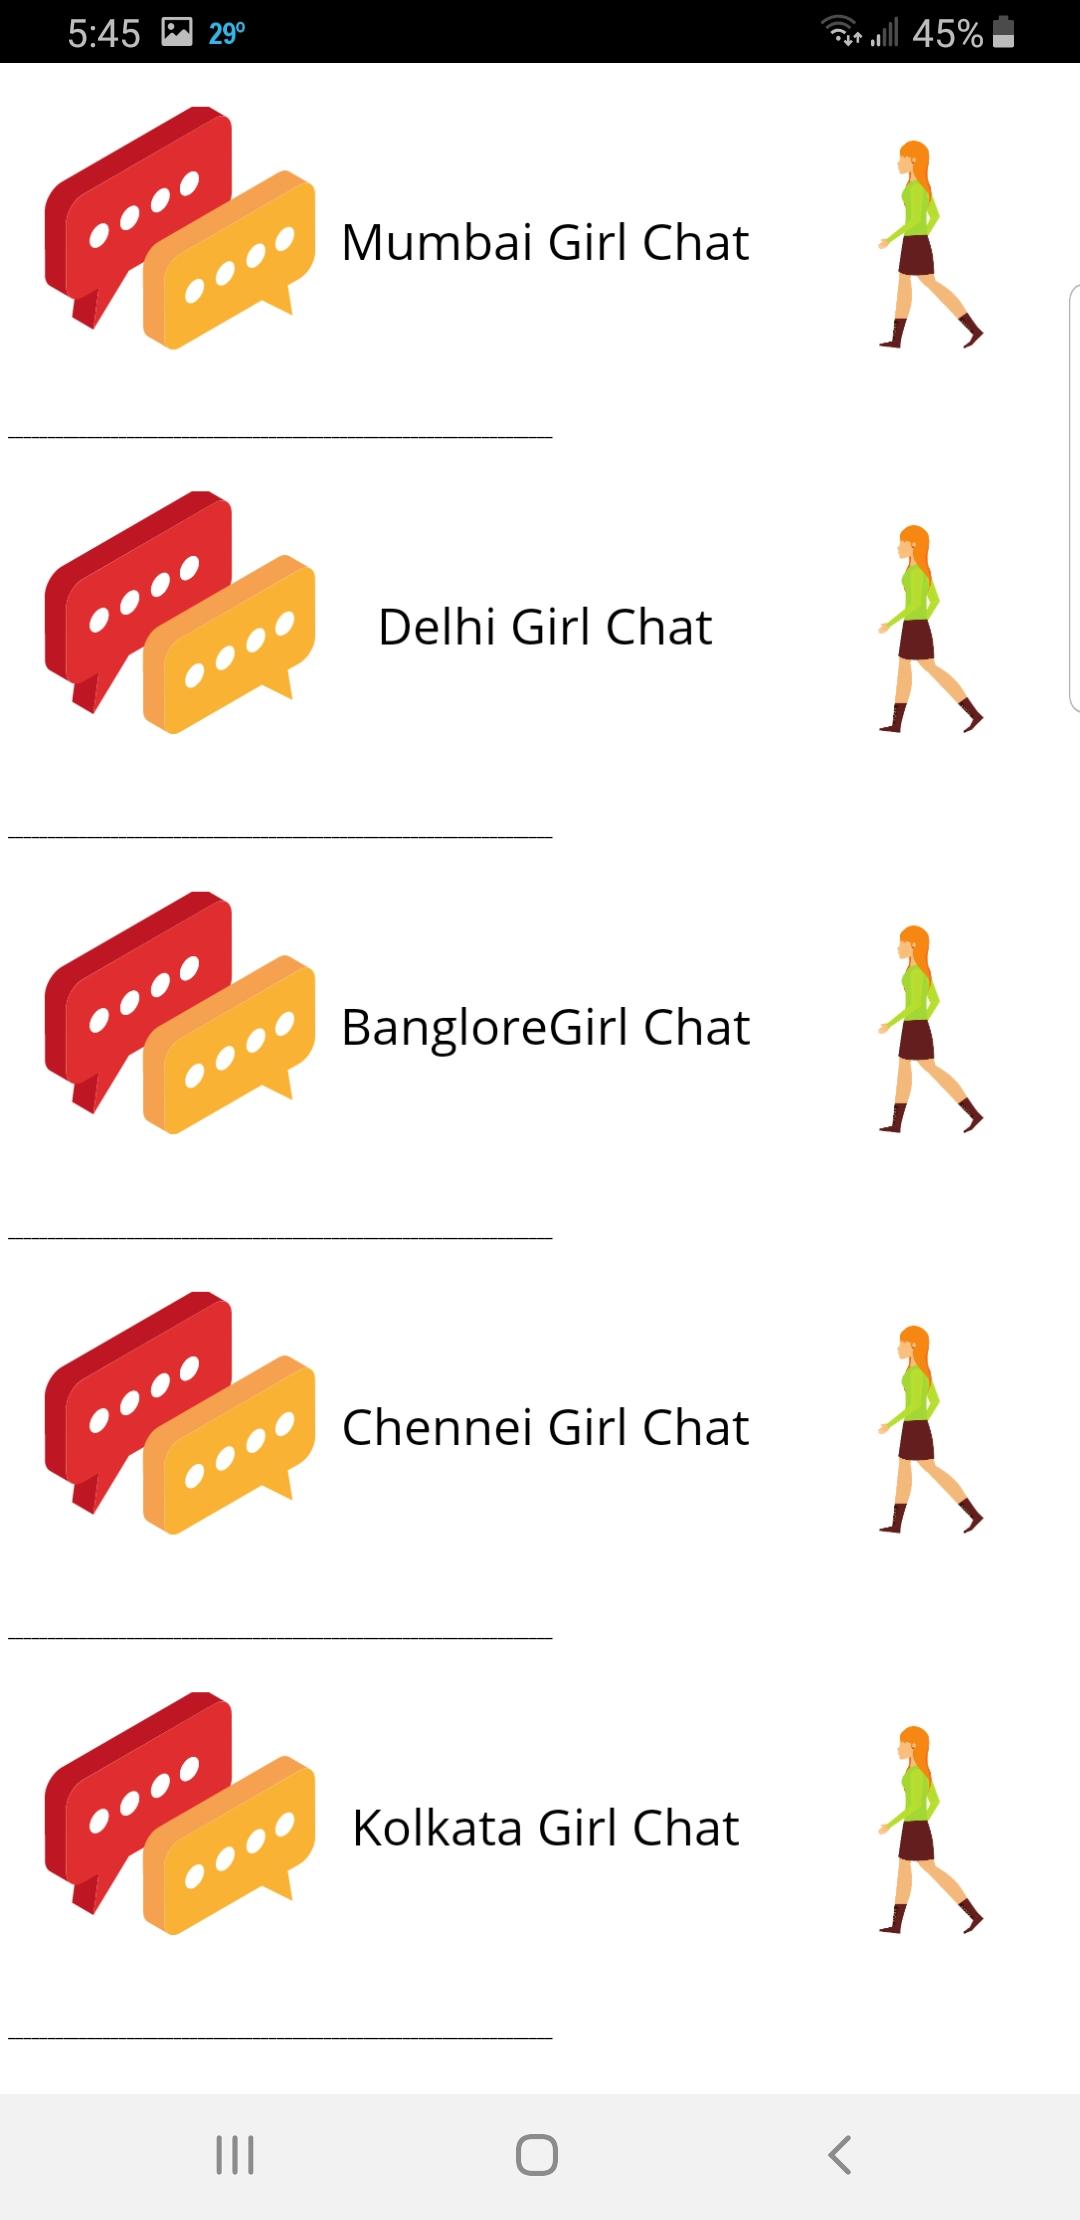 With gorls chat more Free Chat